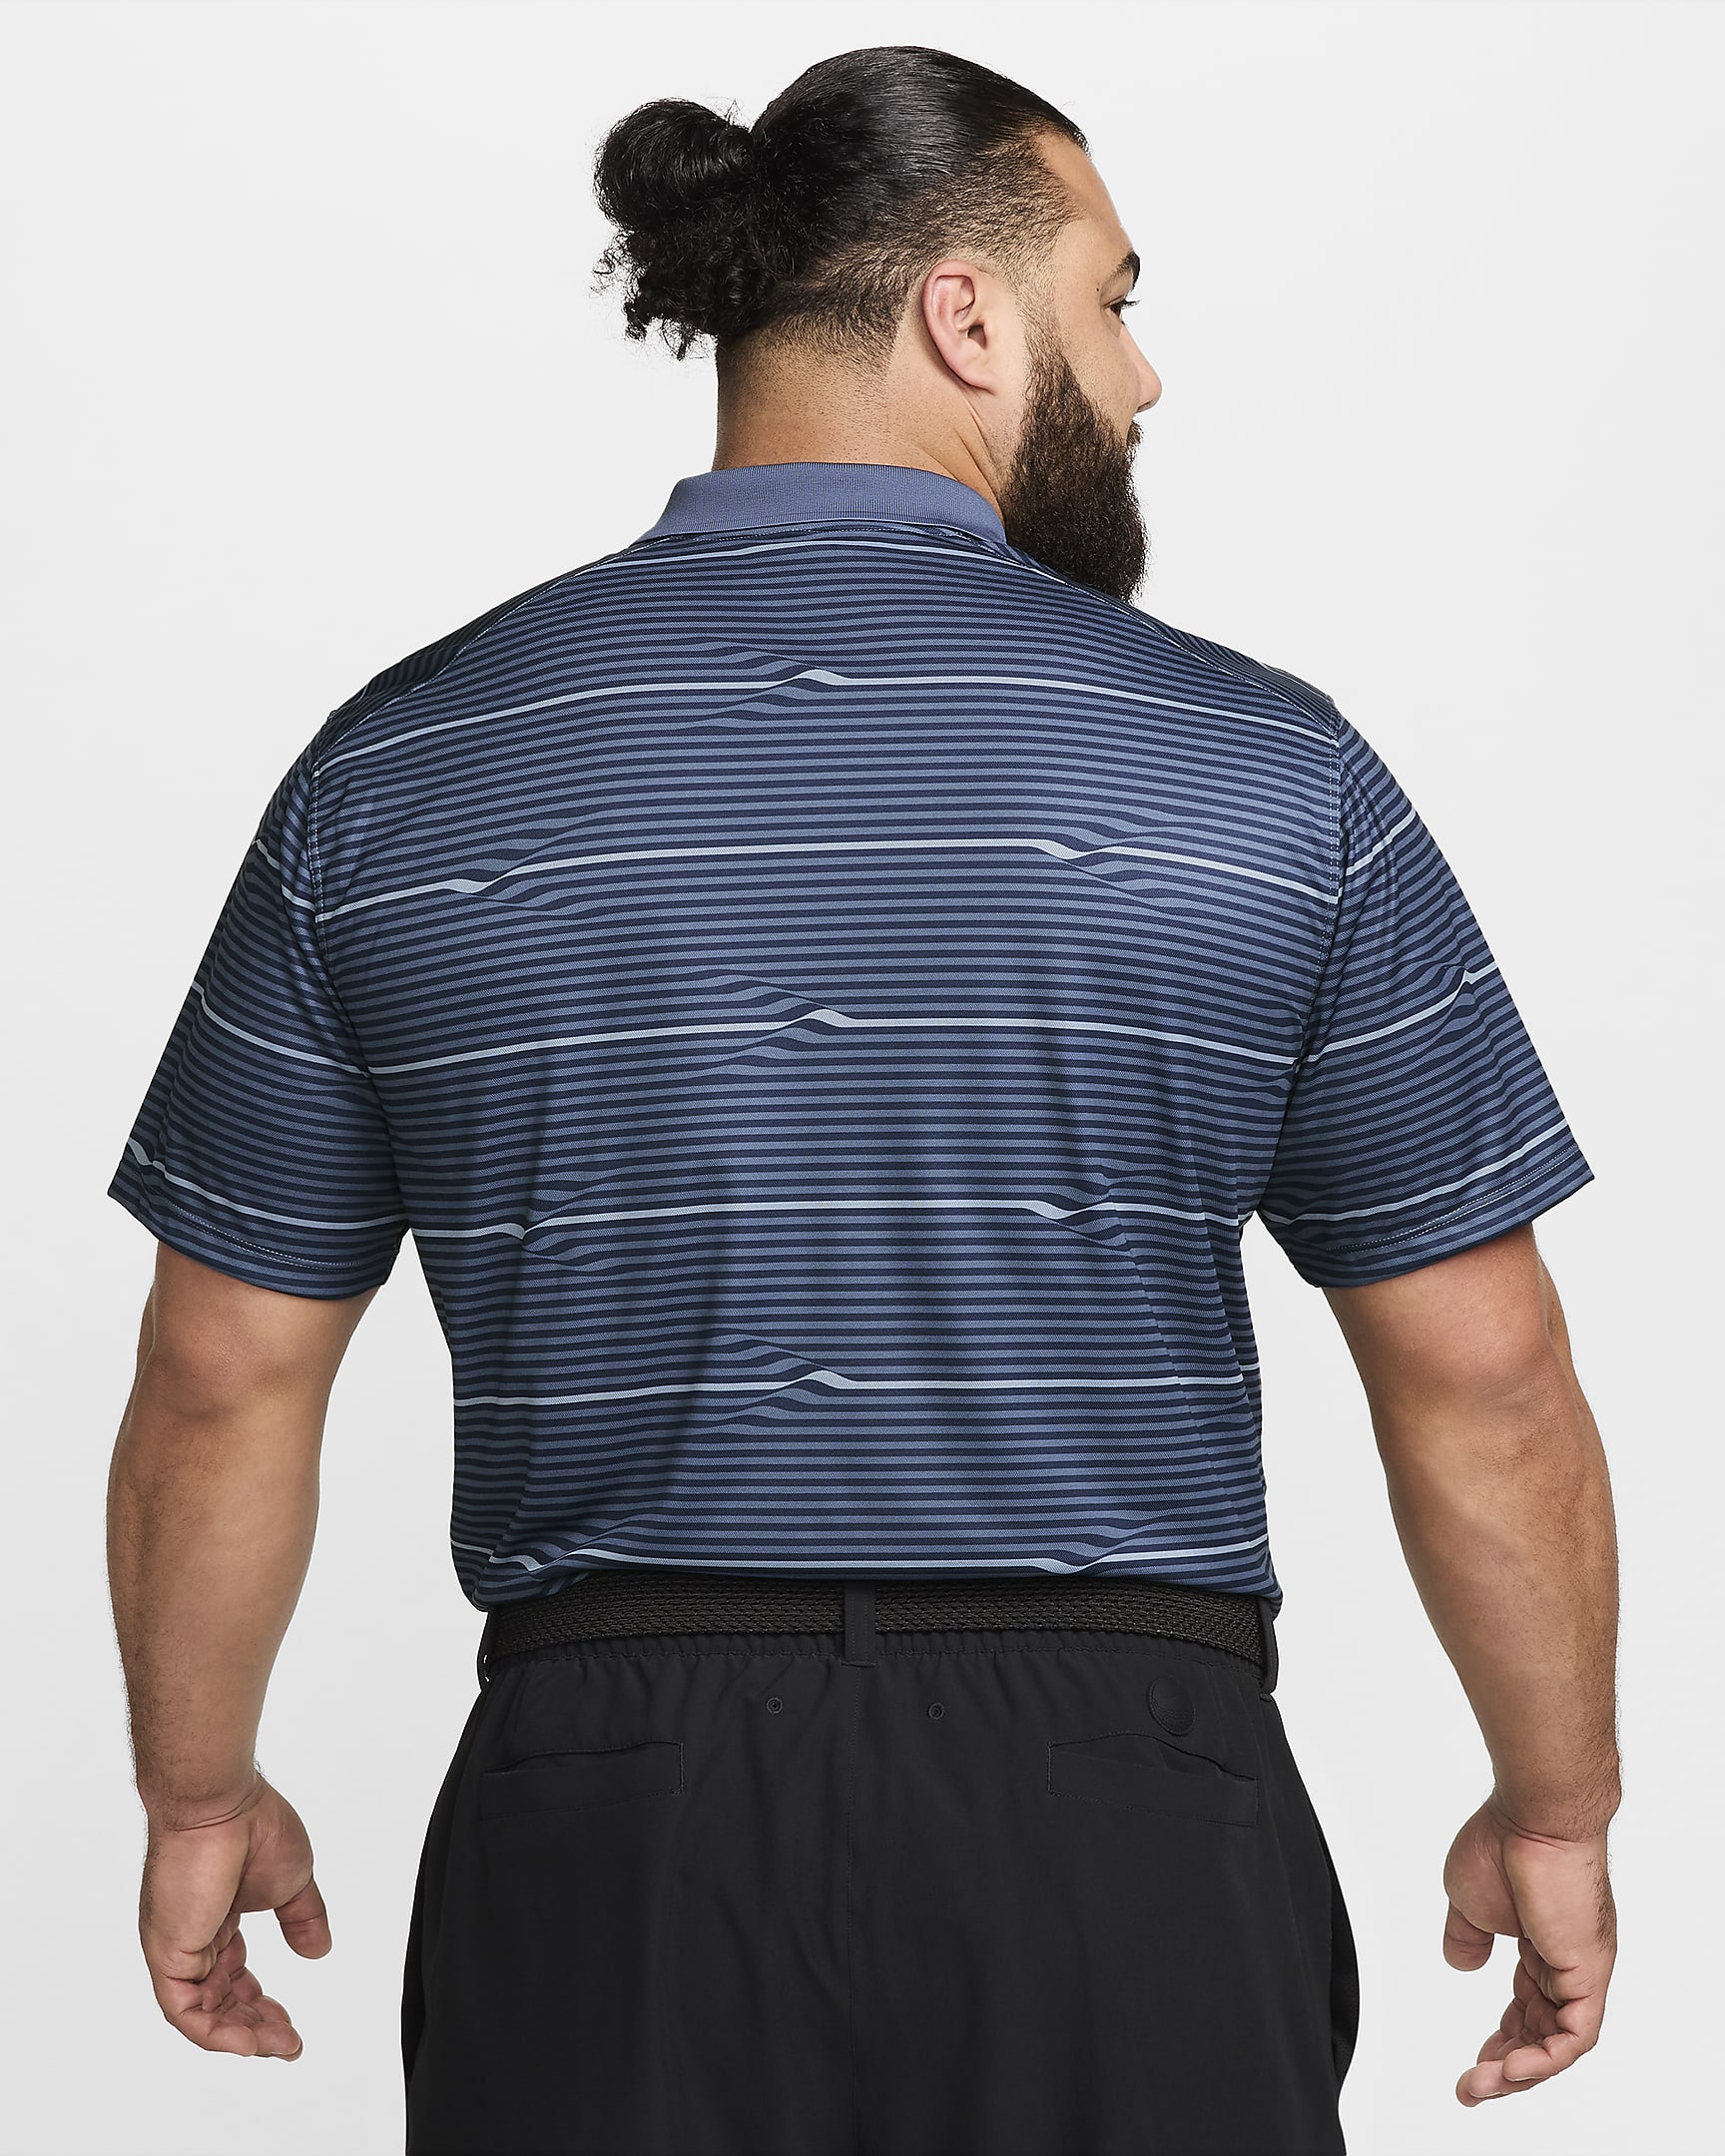 Nike Victory Men's Dri-FIT Golf Polo - Midnight Navy/Diffused Blue/White